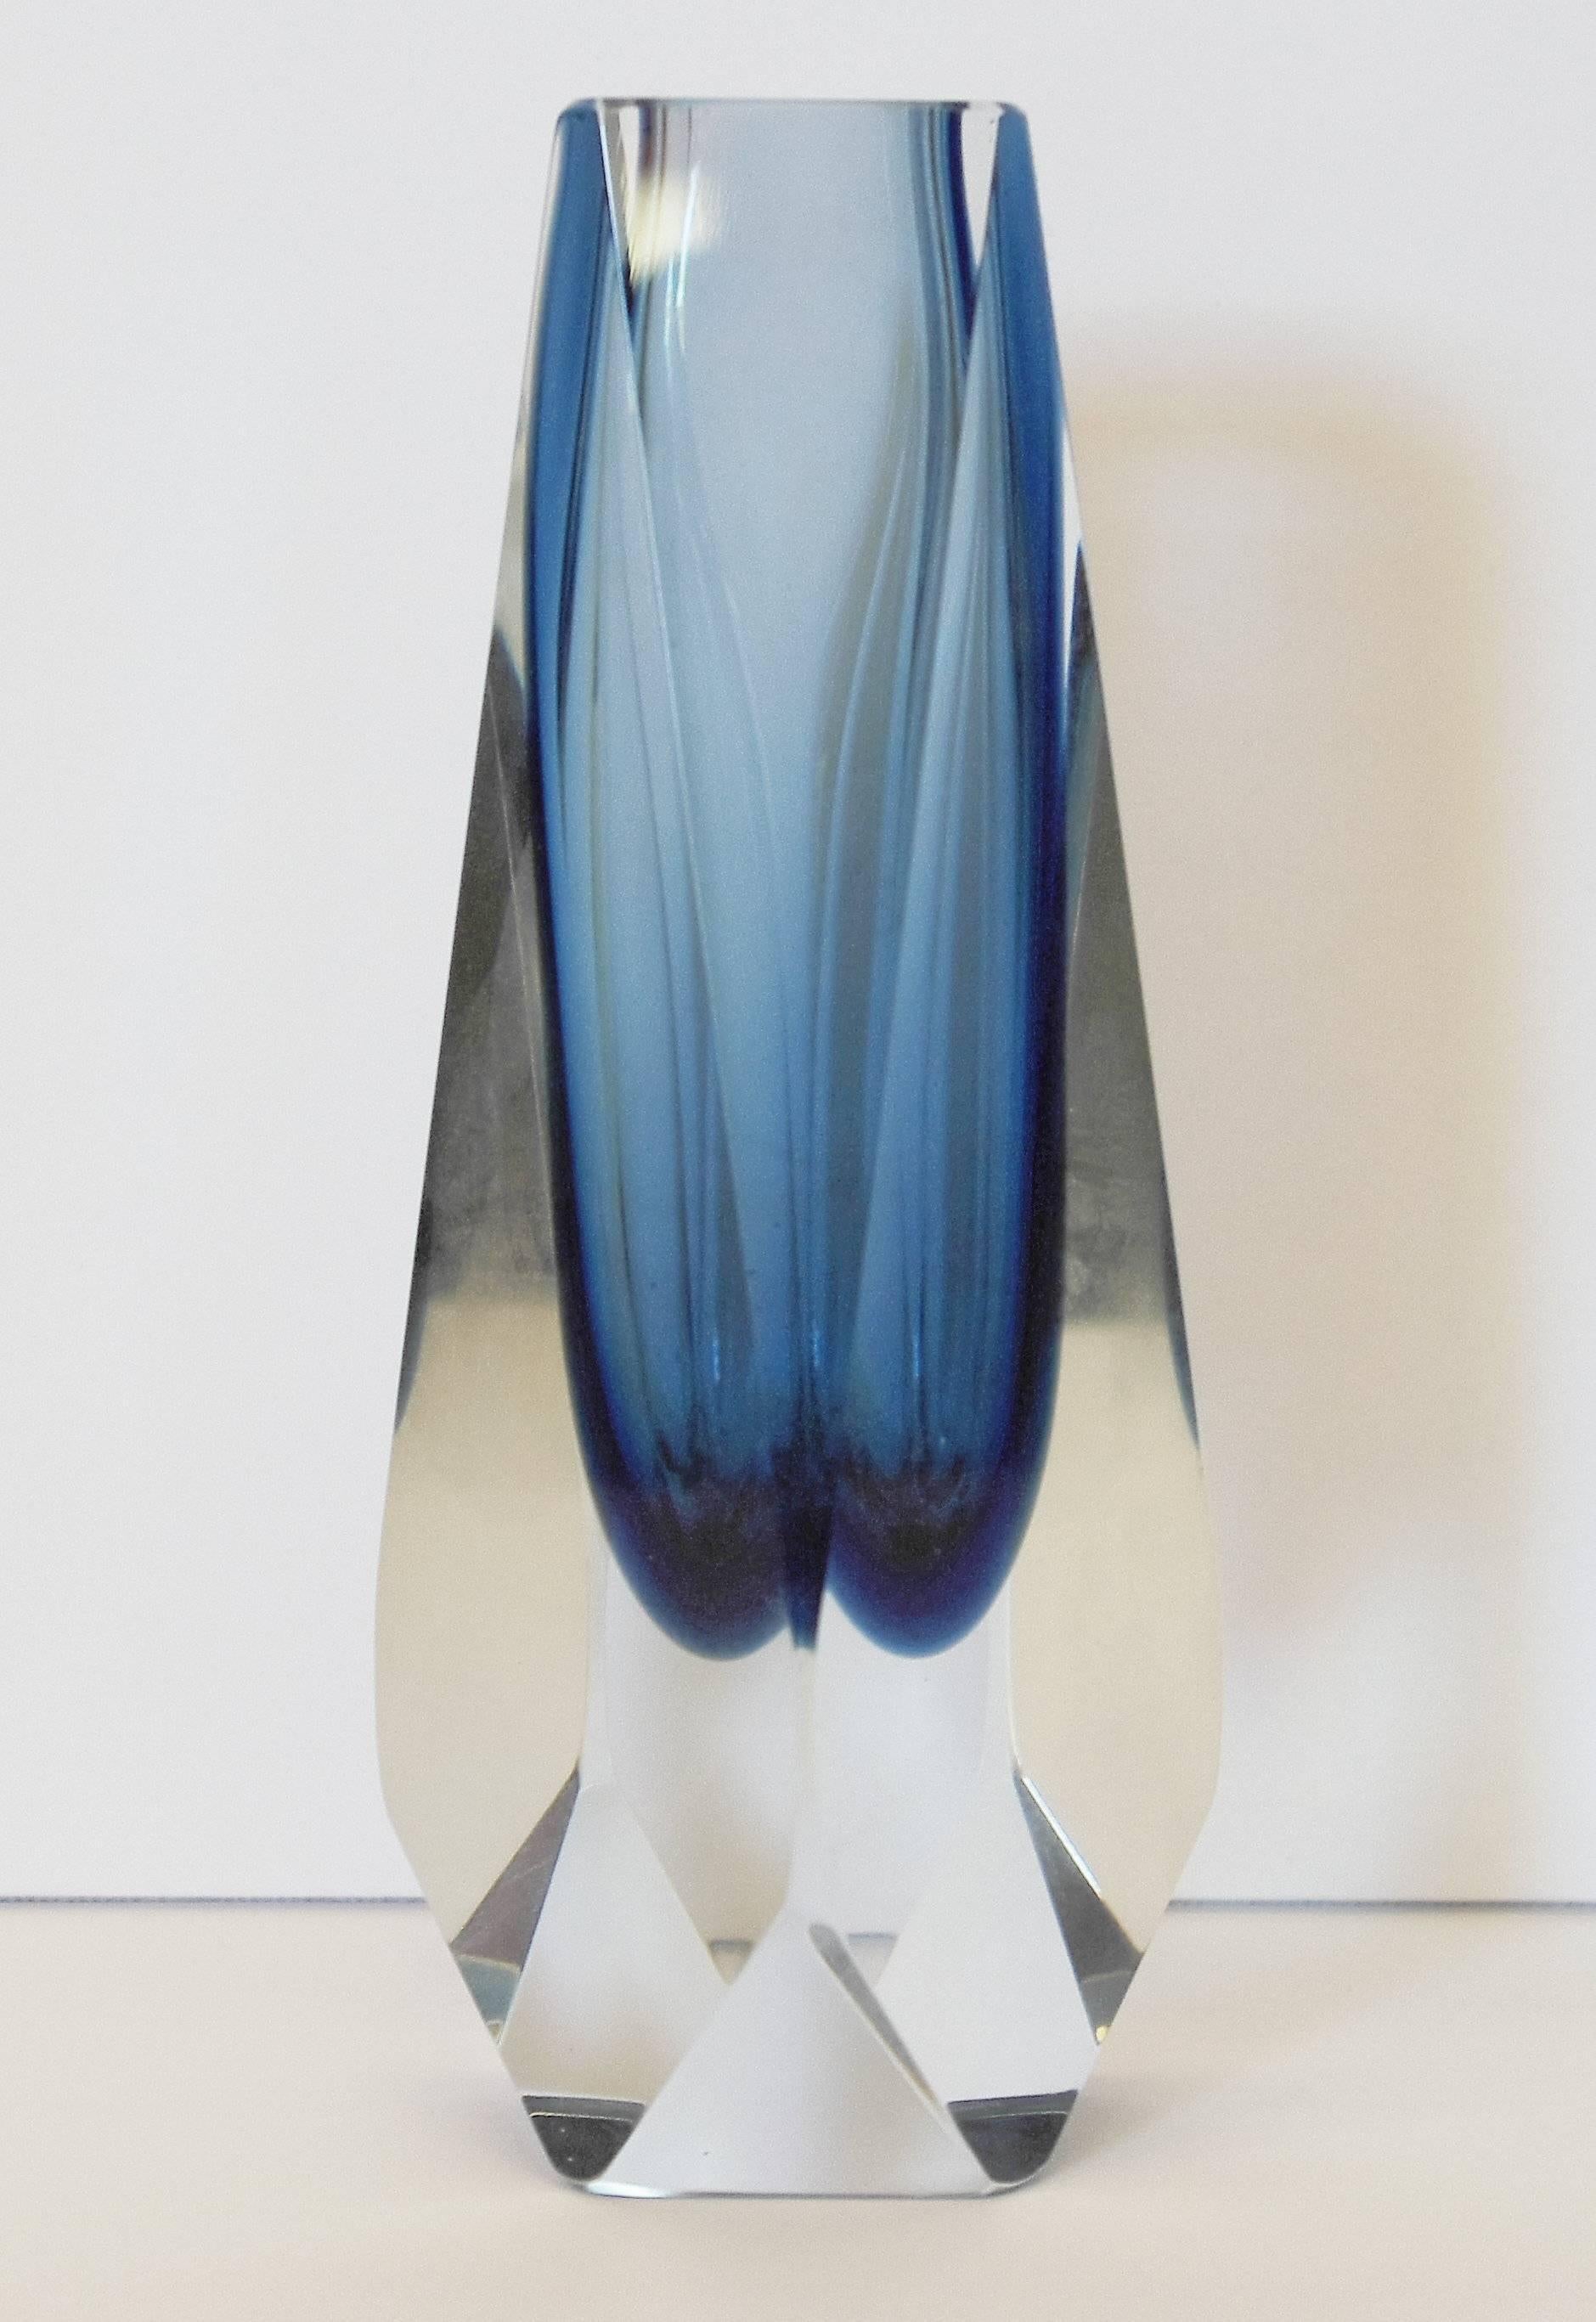 Original vintage Italian vase in Sommerso technique using different layers of Murano glass to produce a dark blue immersed color. Made in Italy in the 1960s.
Measures: Diameter 2.5 inches, height 6.5 inches.
One in stock in Palm Springs.
Order